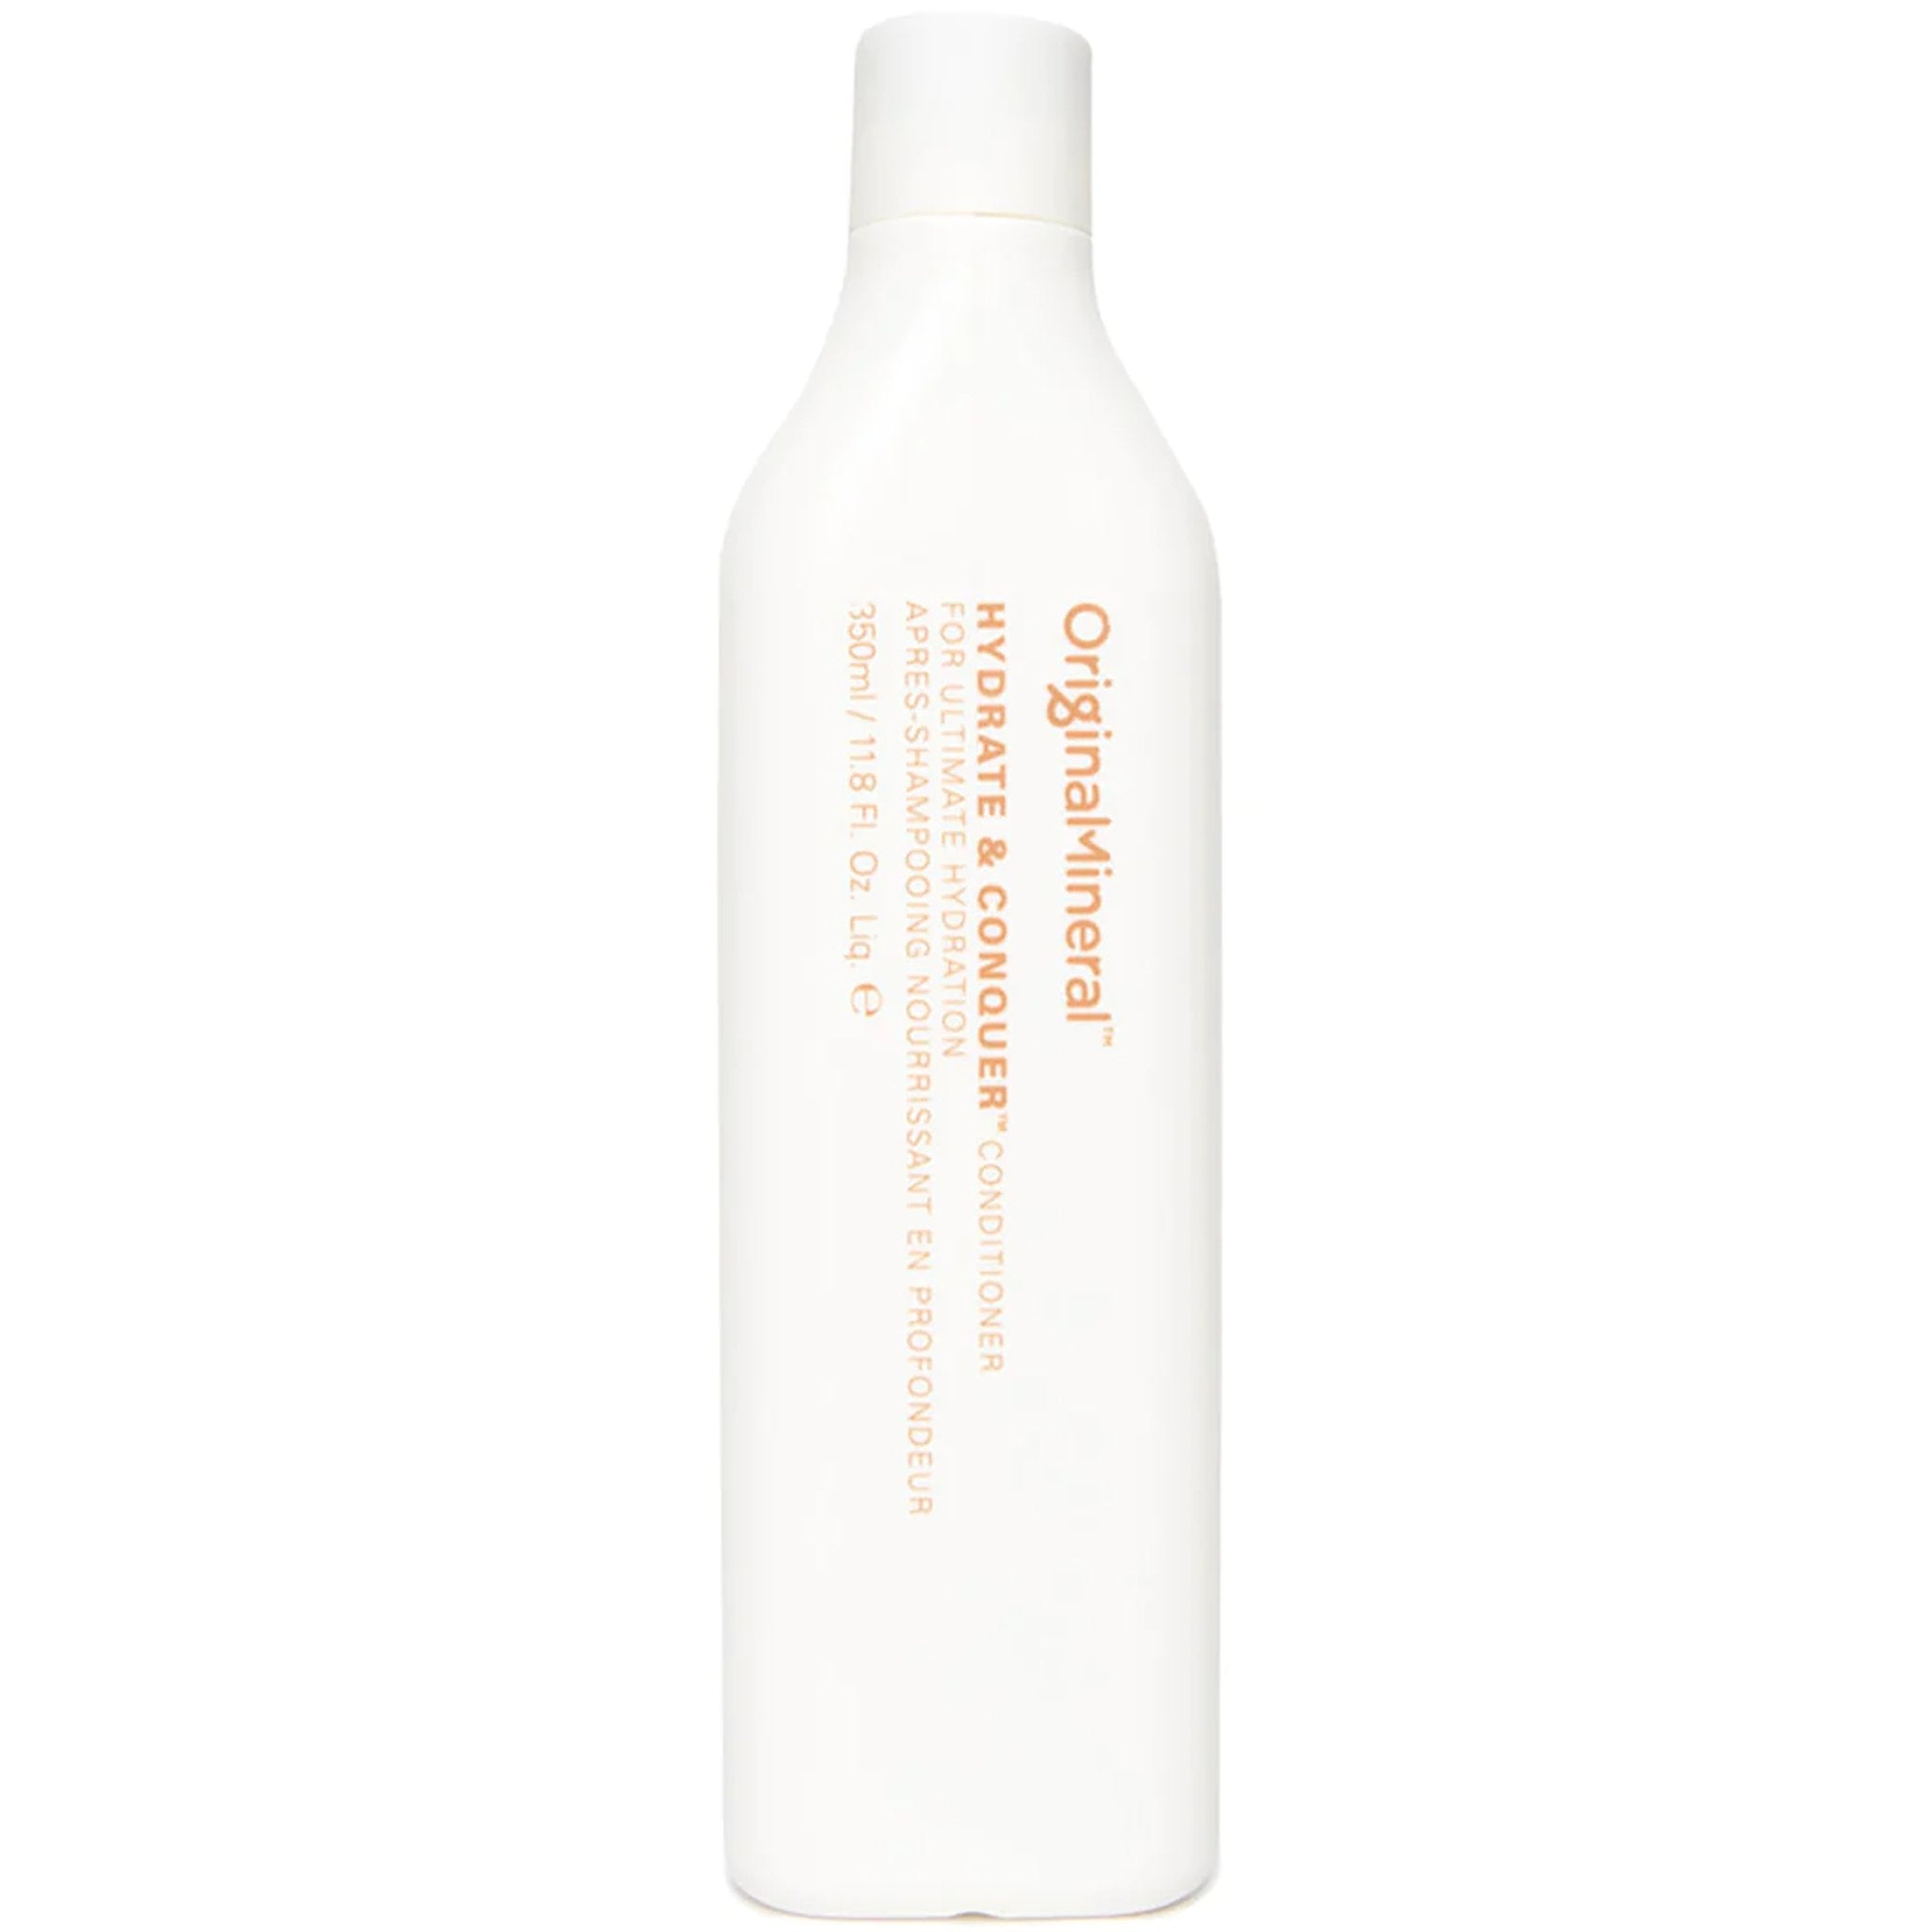 O&M. Revitalisant Hydrate and Conquer - 350 ml - Concept C. Shop